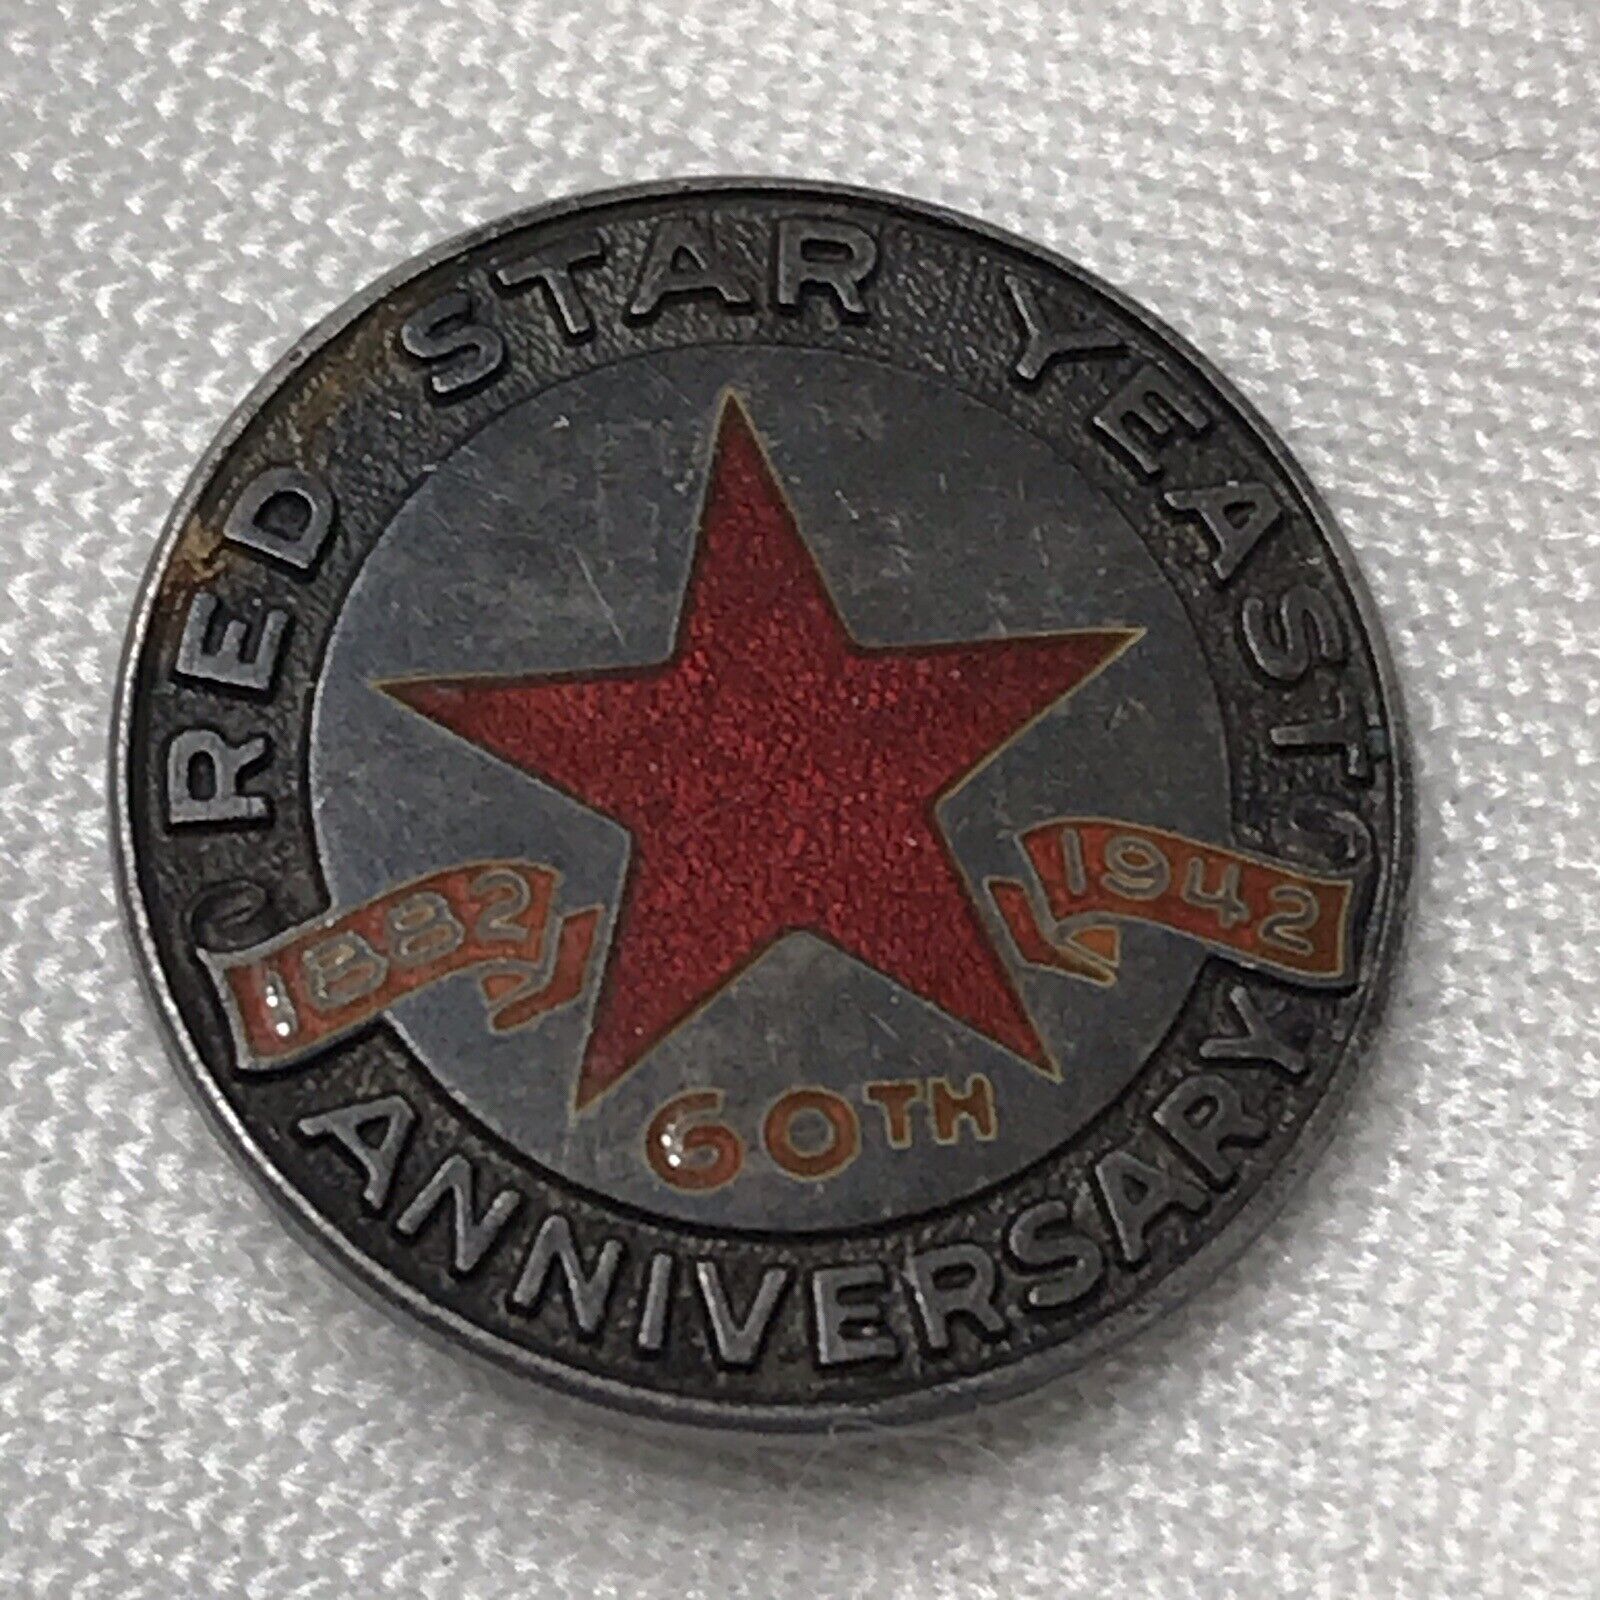 WW2 Era Sterling Silver Red Star Yeast 60th Anniversary 1882 - 1942 Lapel Pin